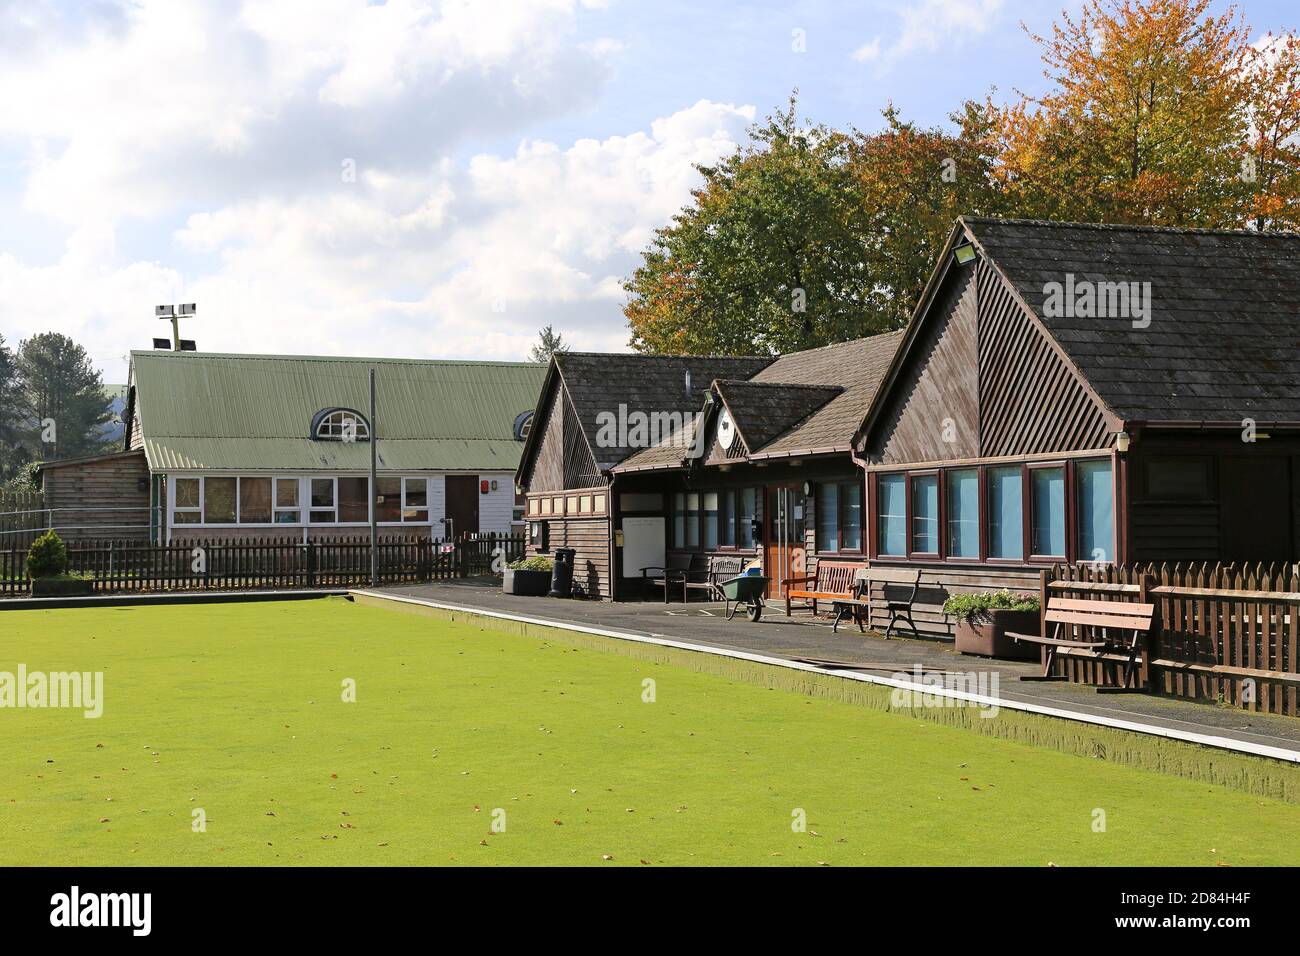 Builth Wells Bowling Club, Groe Park, Builth Wells, Brecknockshire, Powys, Wales, Great Britain, United Kingdom, UK, Europe Stock Photo